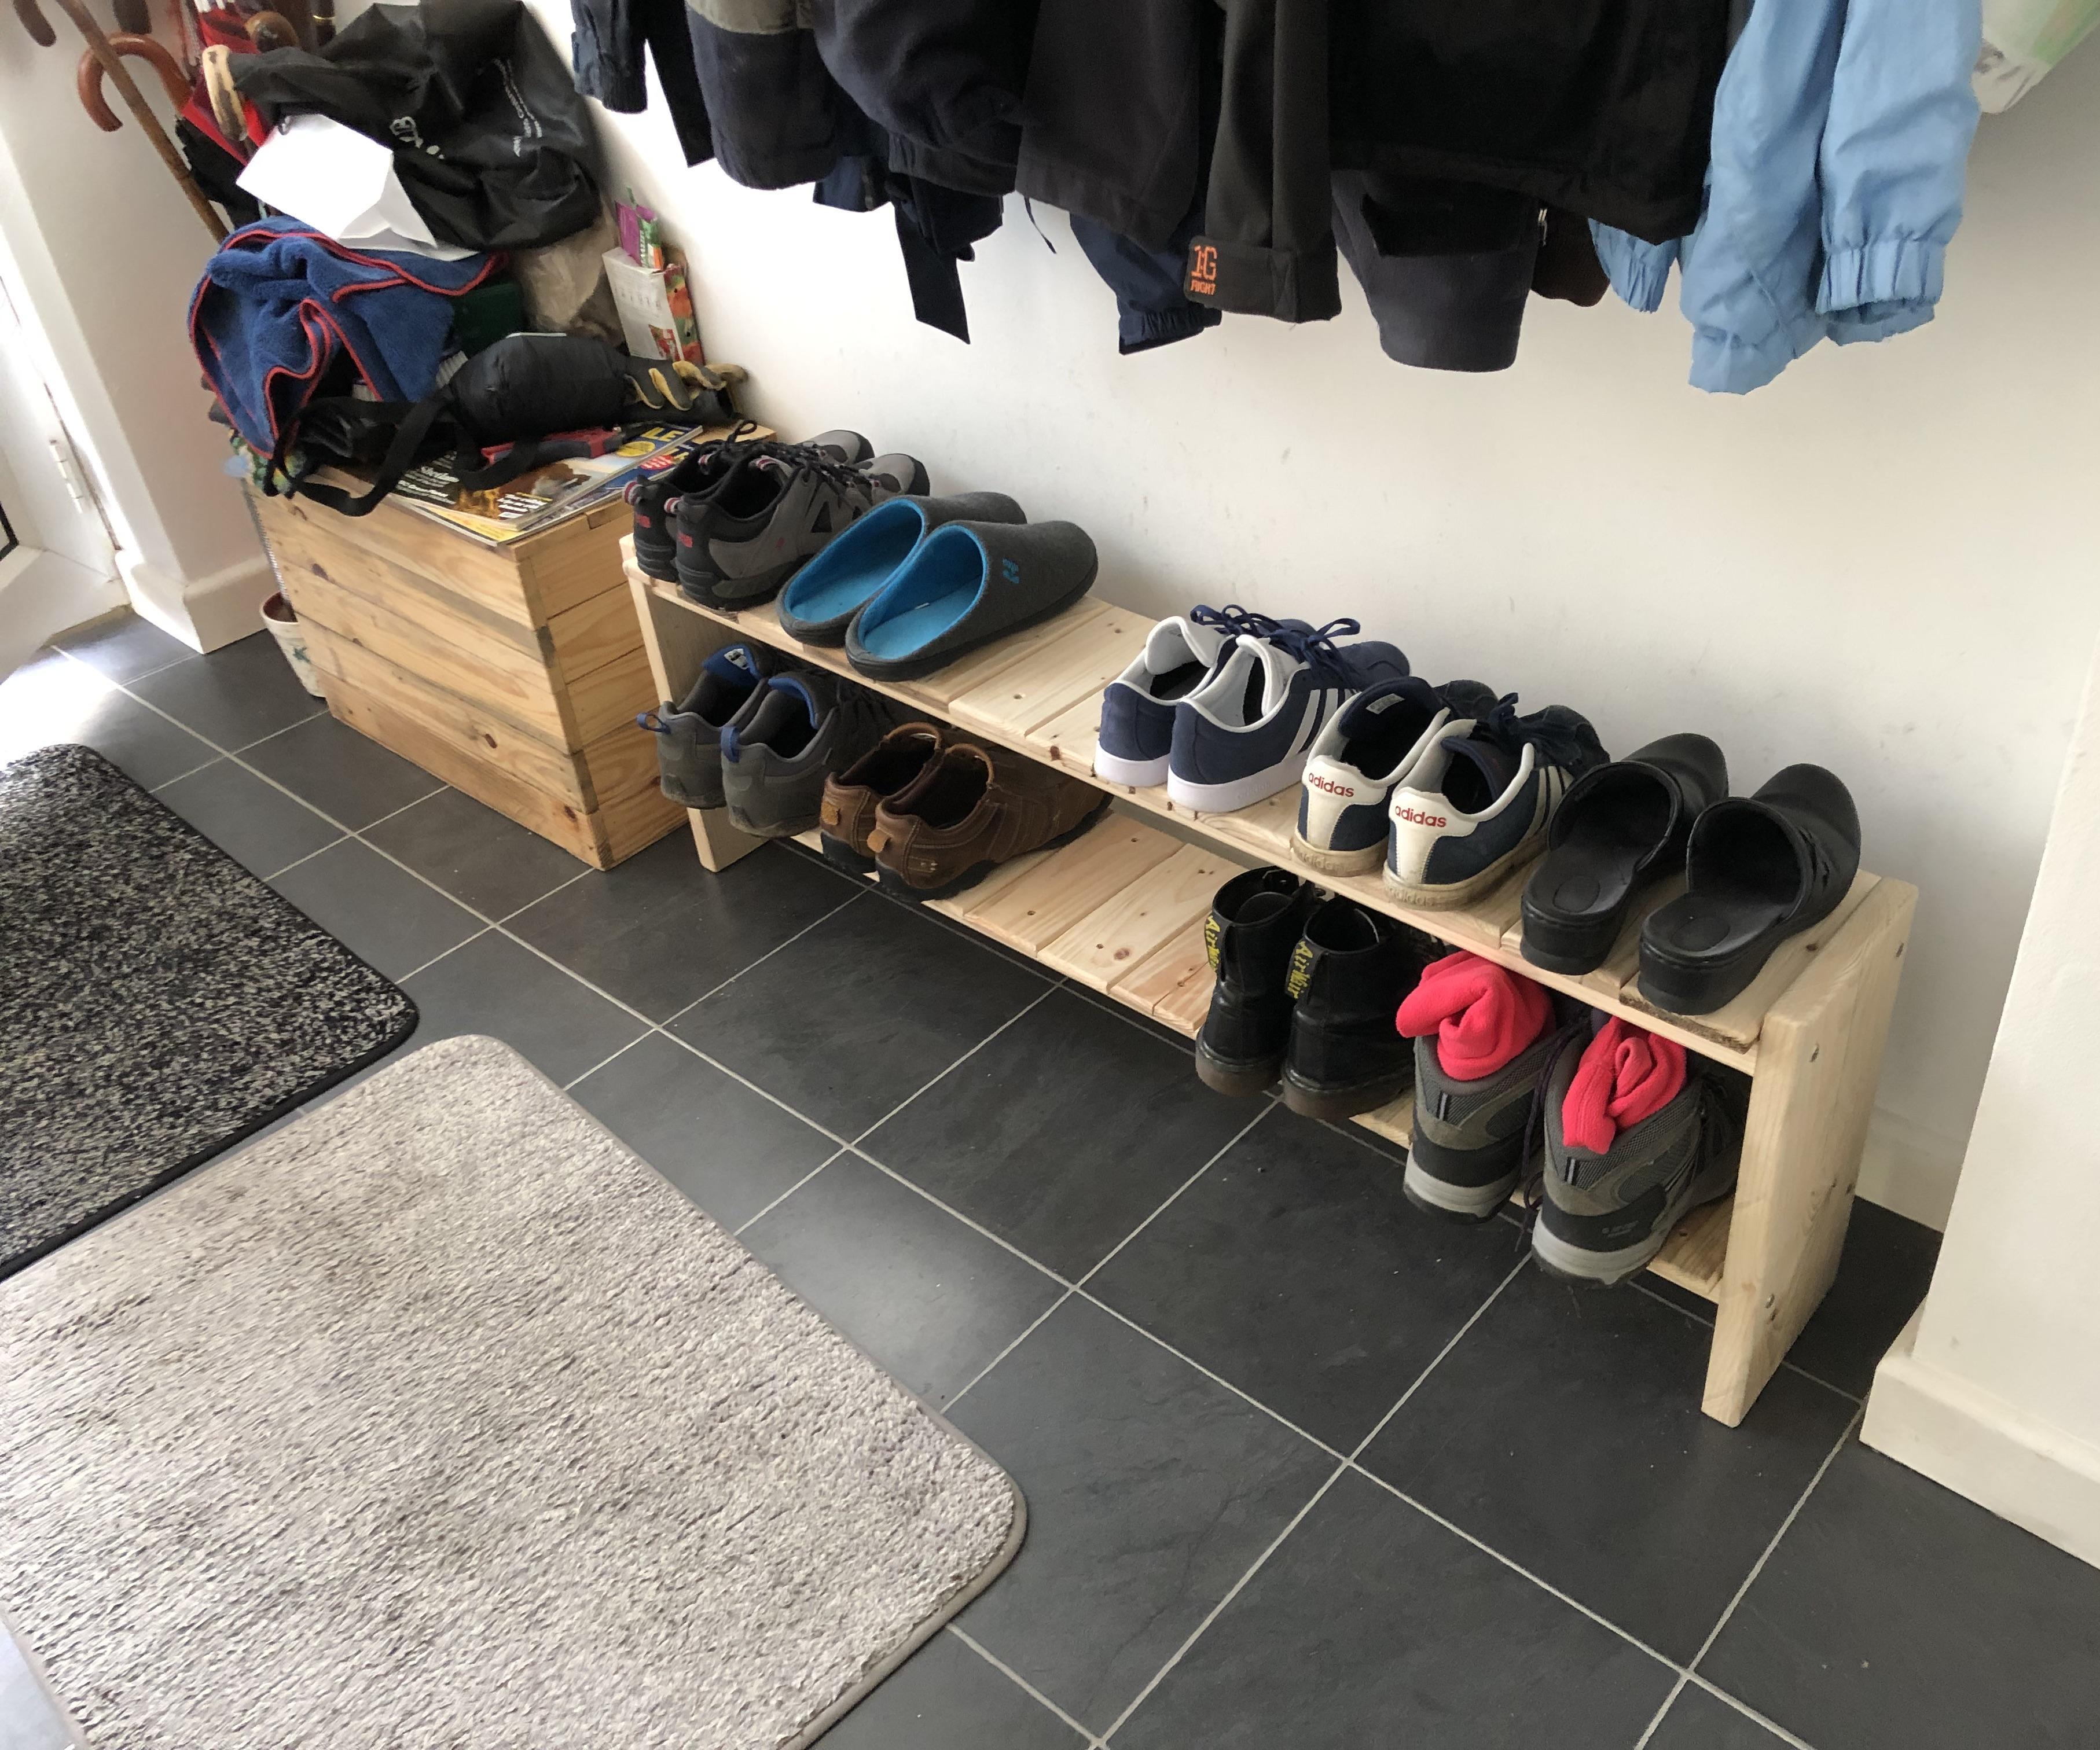  Scaffolding Board and Pallet Wood Rustic Shoe Rack in a Day